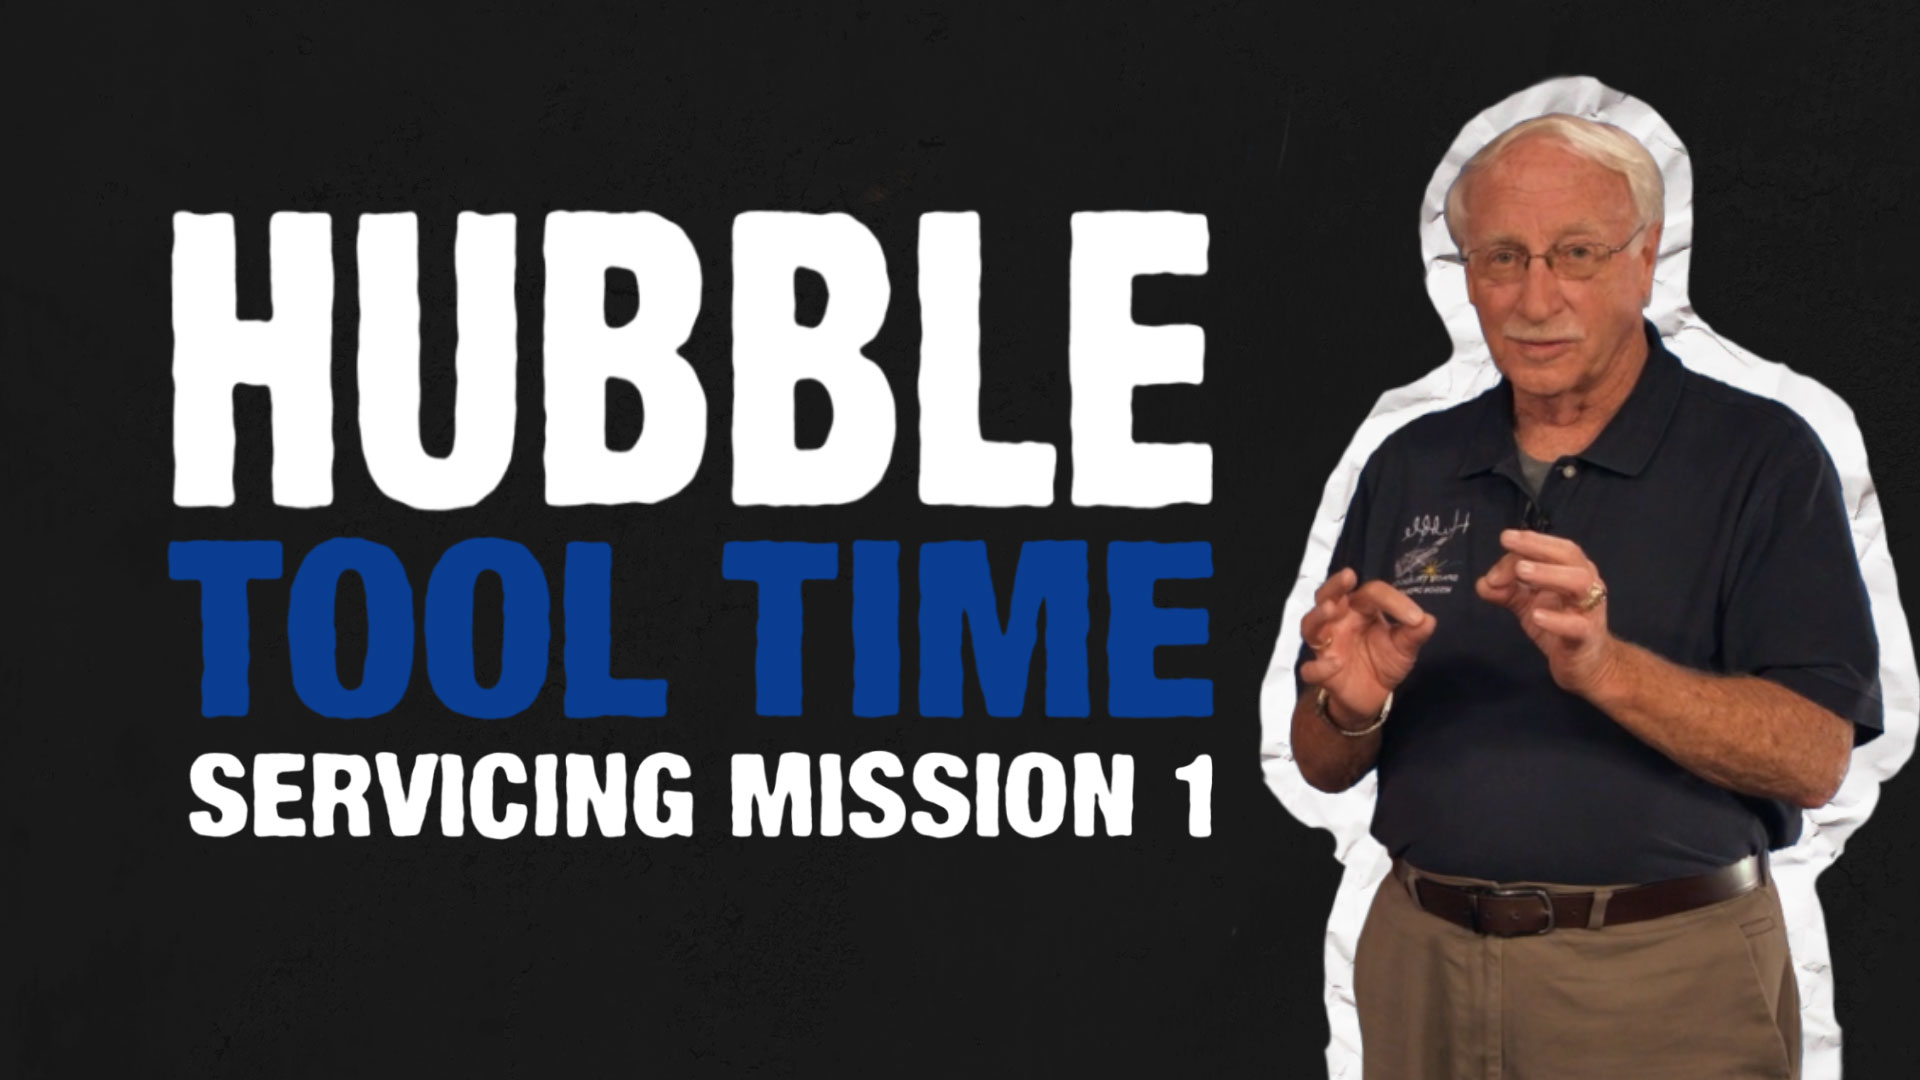 Preview Image for Hubble Tool Time Episode 2 - Servicing Mission 1